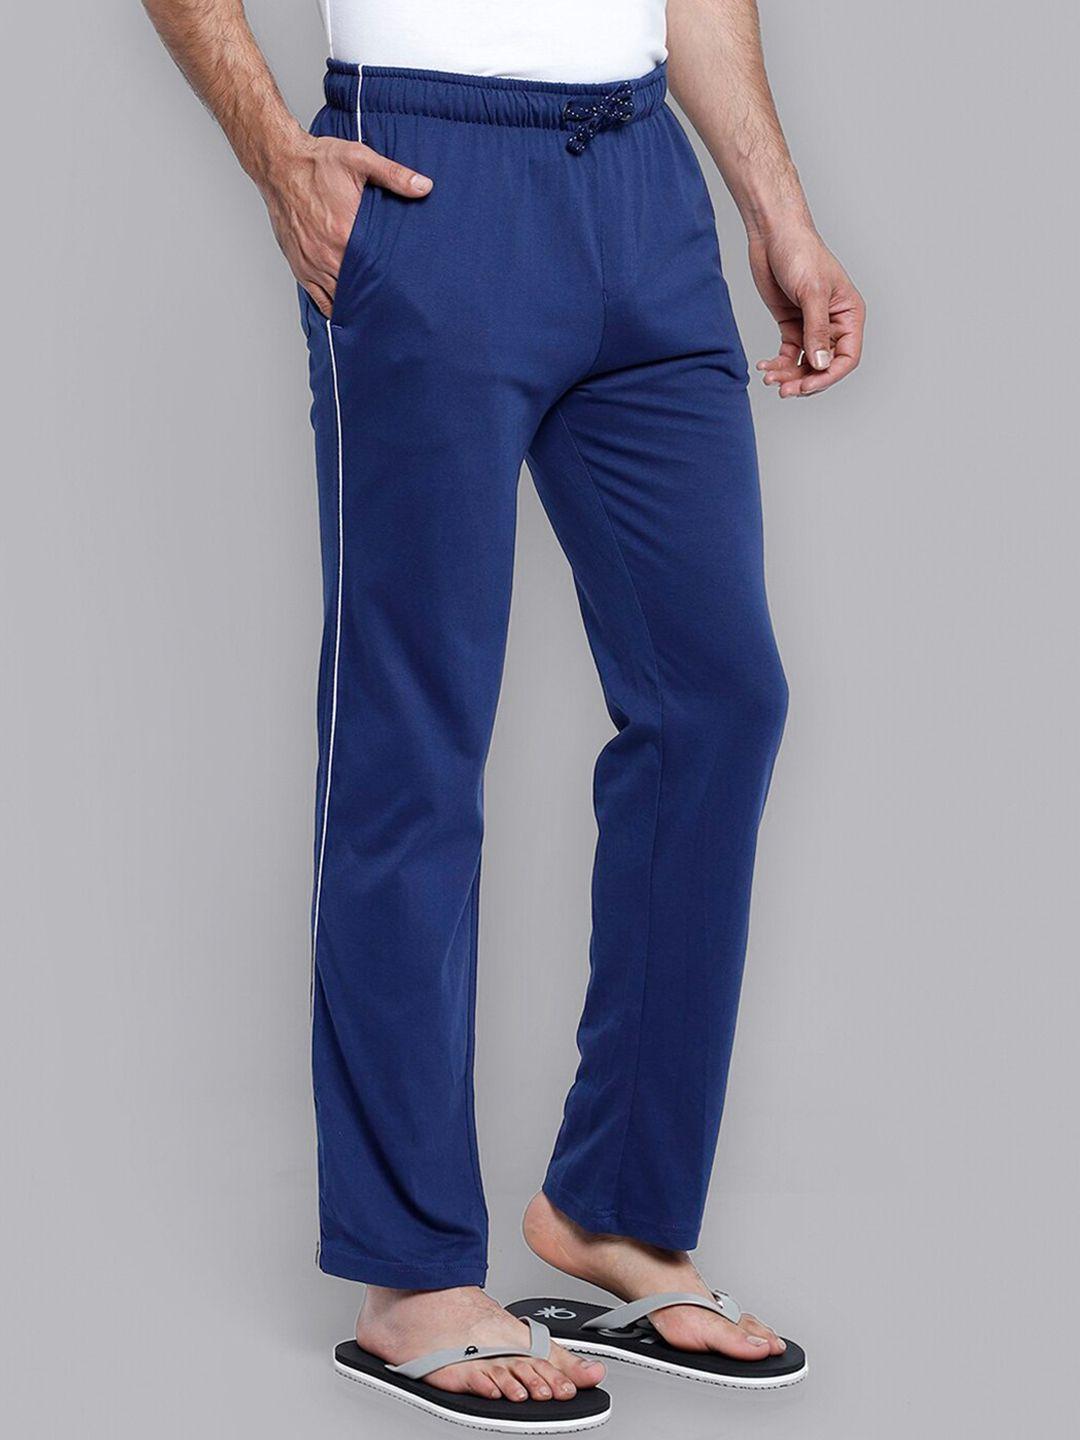 free authority men navy blue superman featured lounge pants